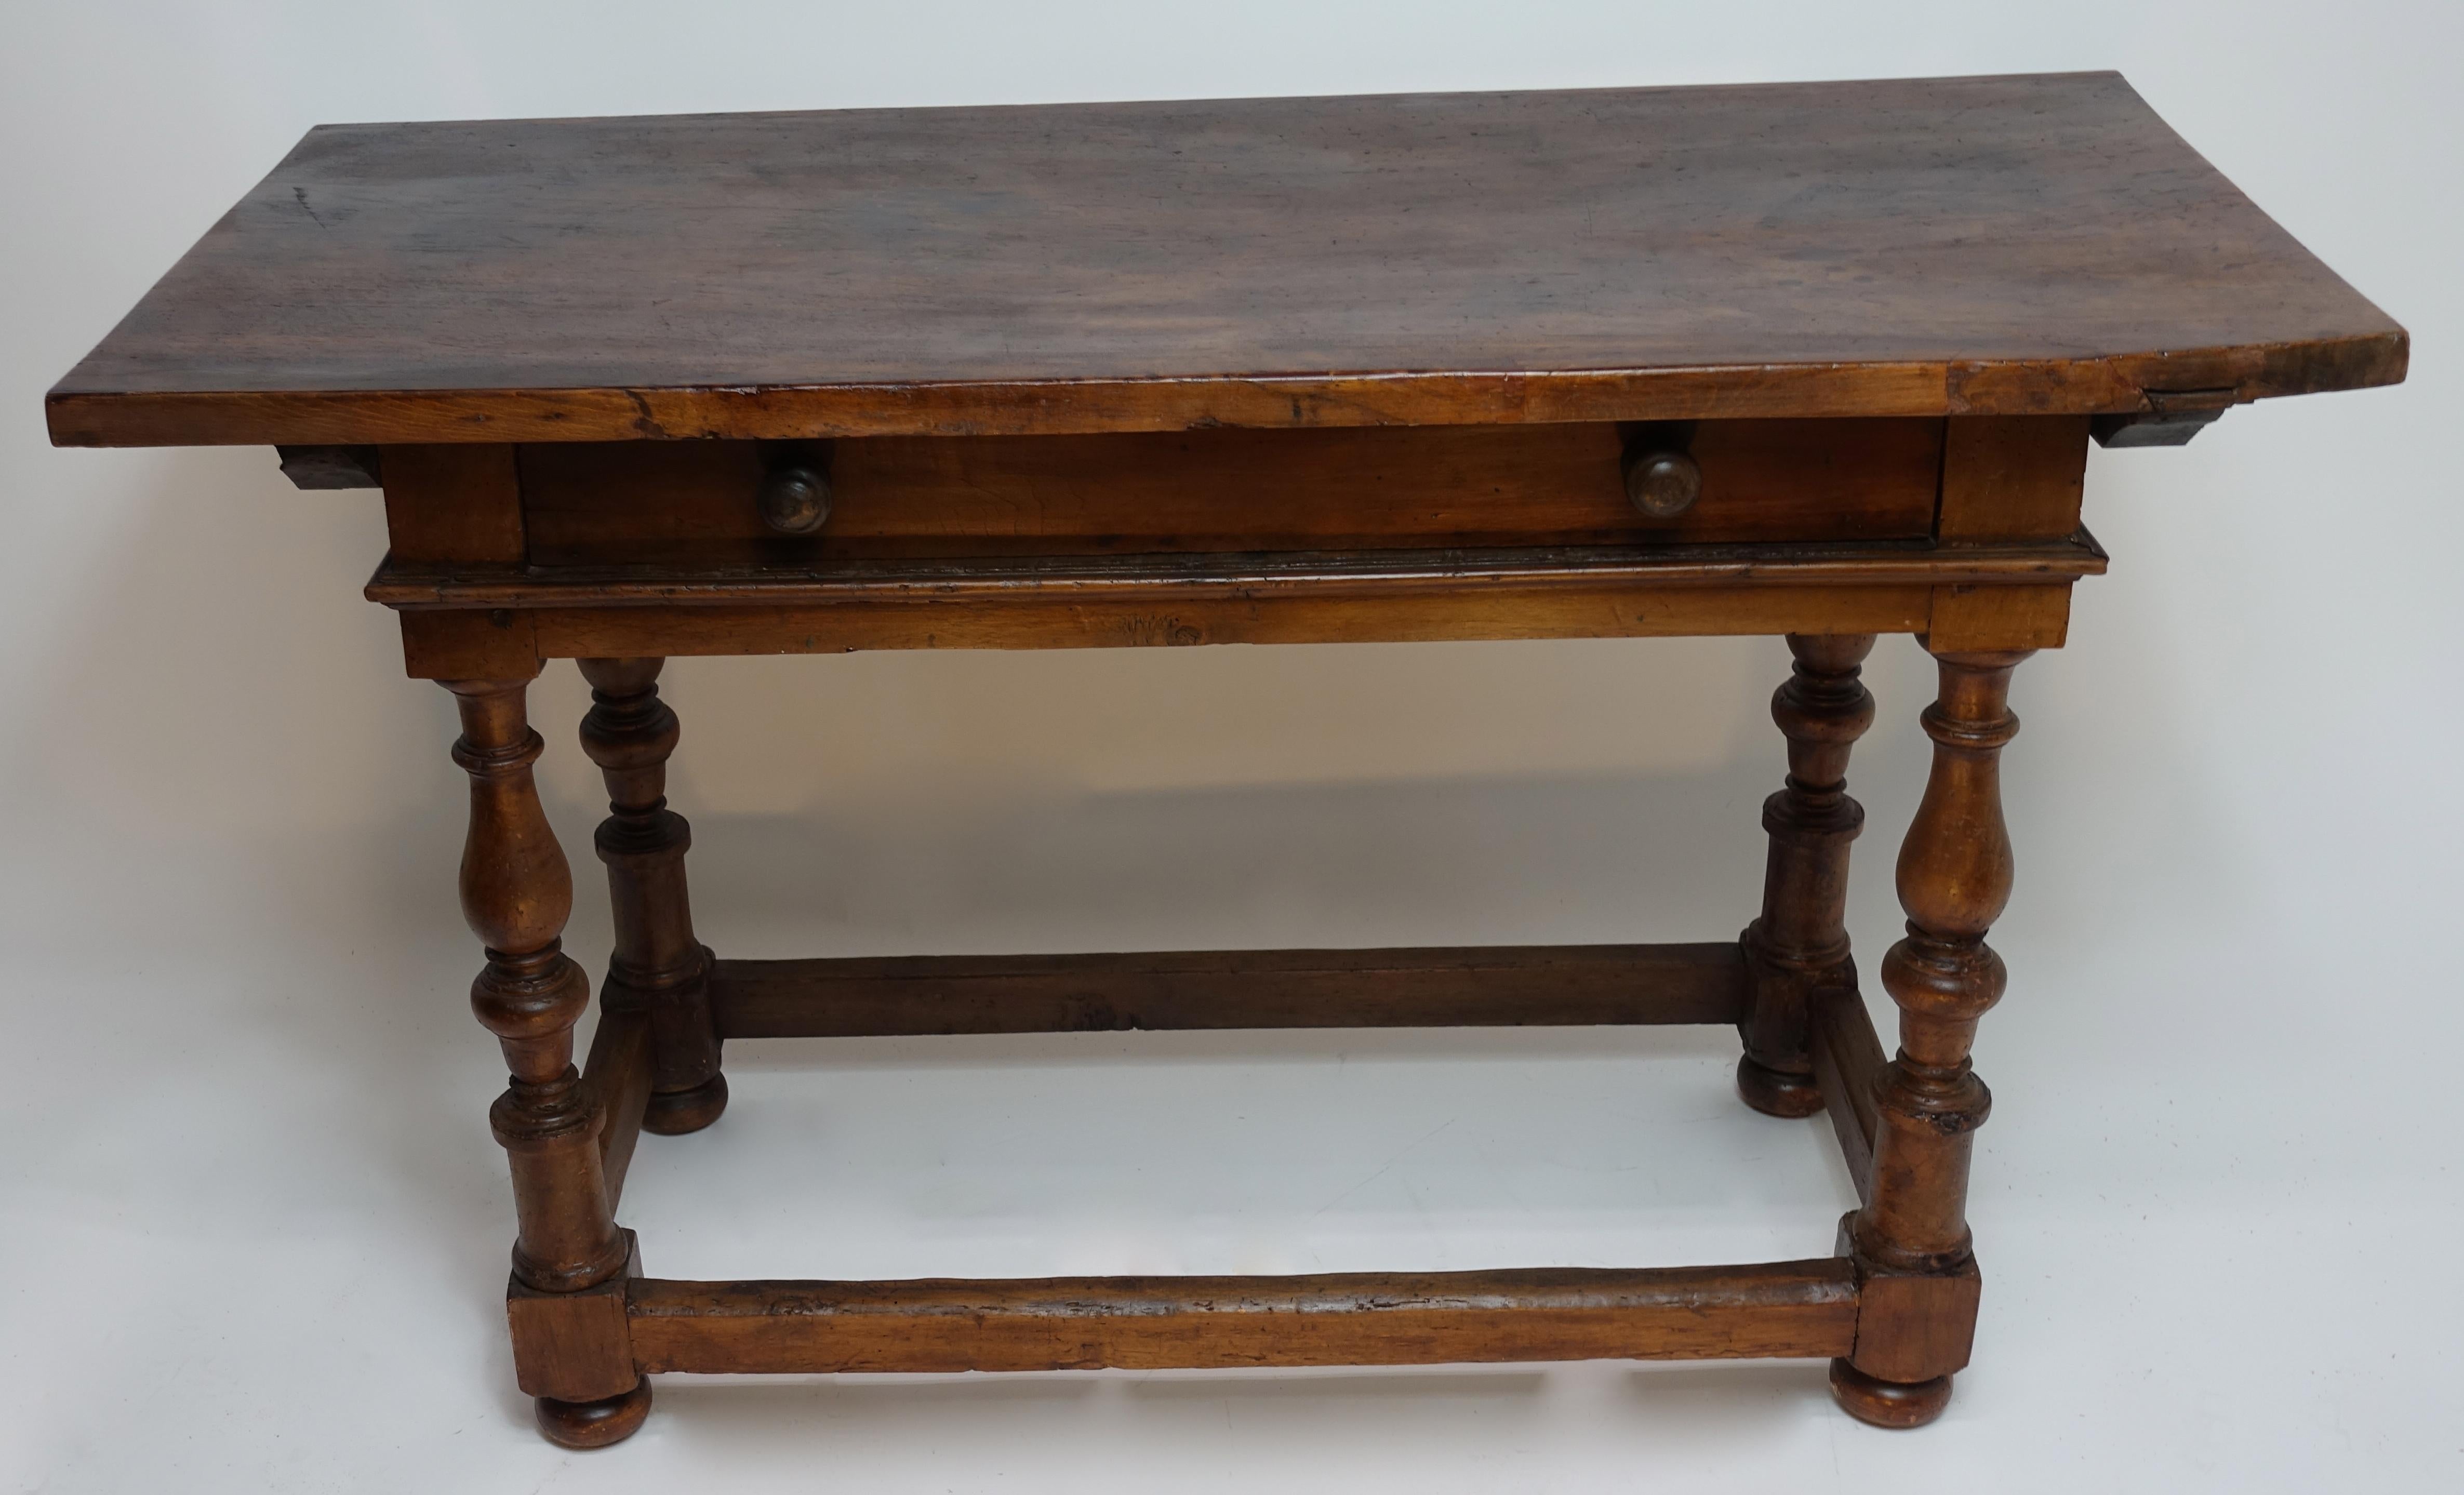 Renaissance Revival Italian 18th Century Walnut Table with Large Drawer